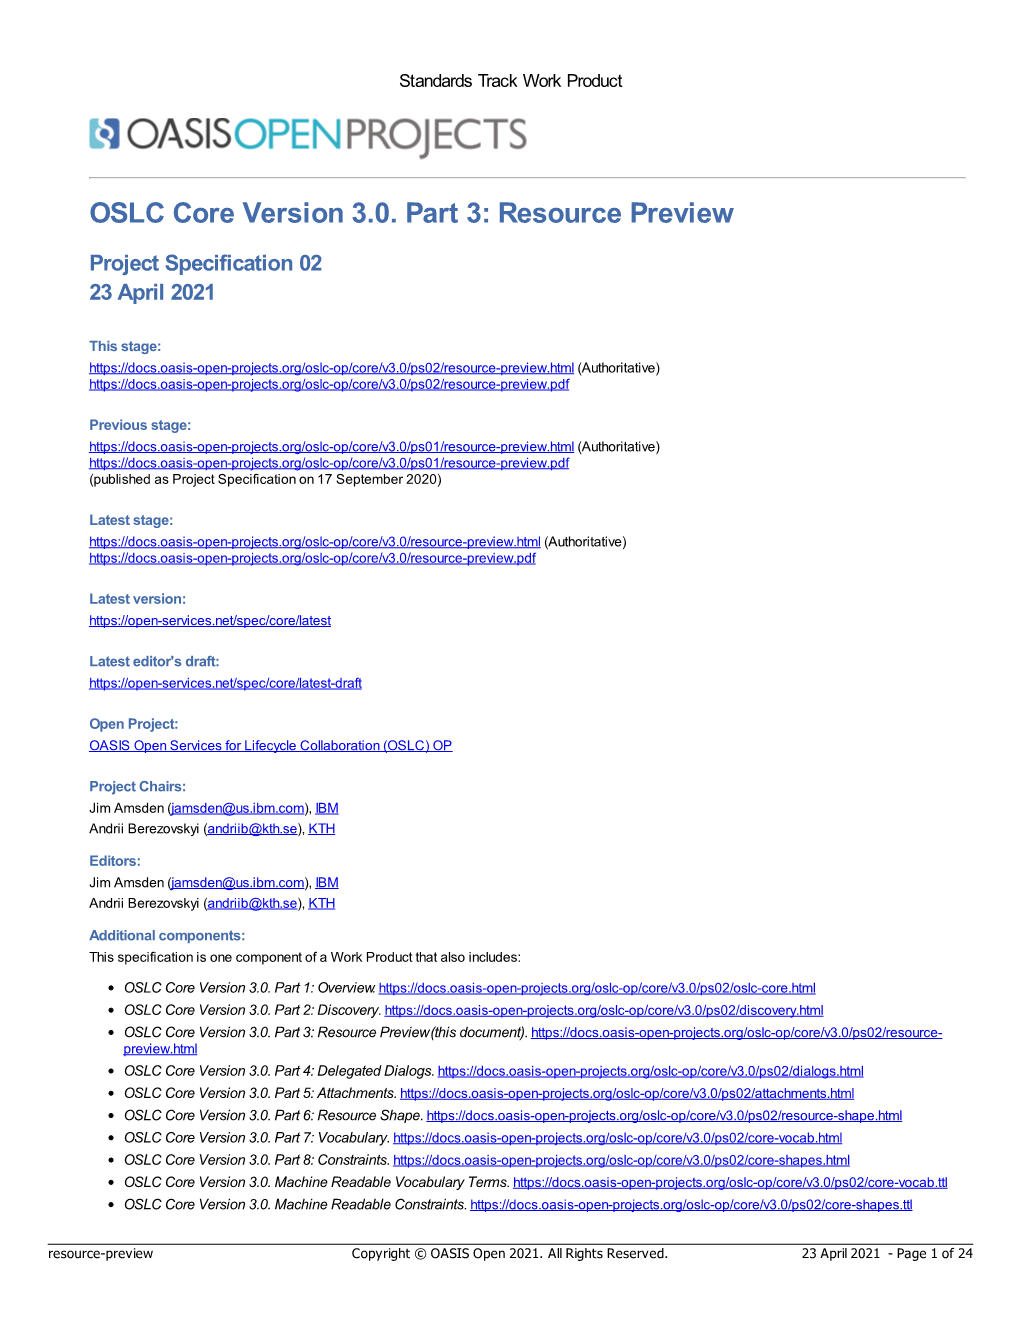 OSLC Core Version 3.0. Part 3: Resource Preview Project Specification 02 23 April 2021